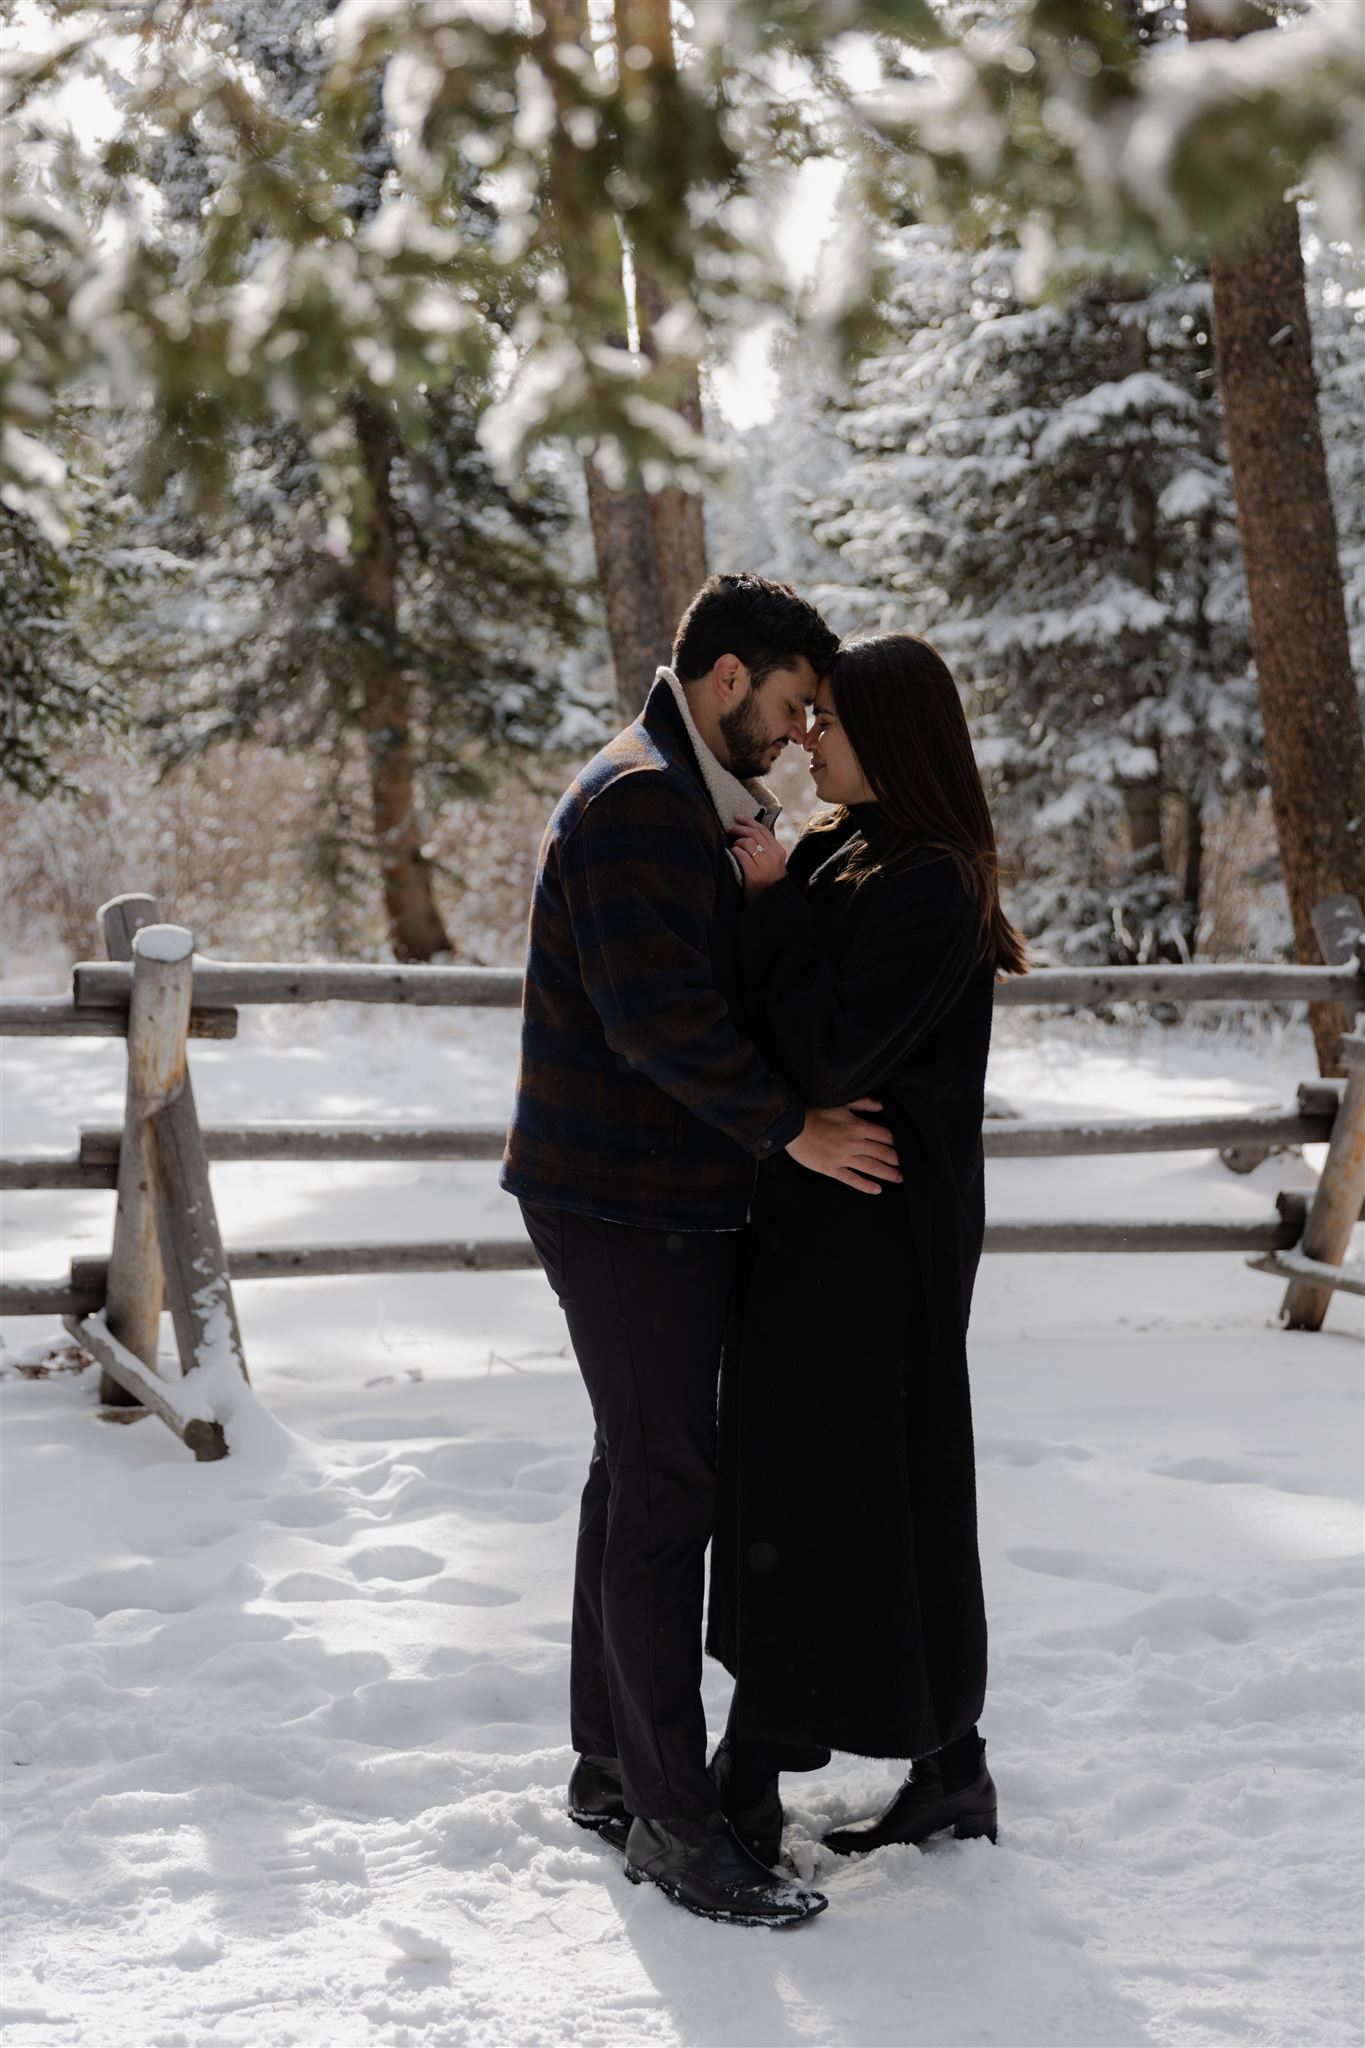 Couple embracing one another under snowy covered trees during Colorado engagement photos